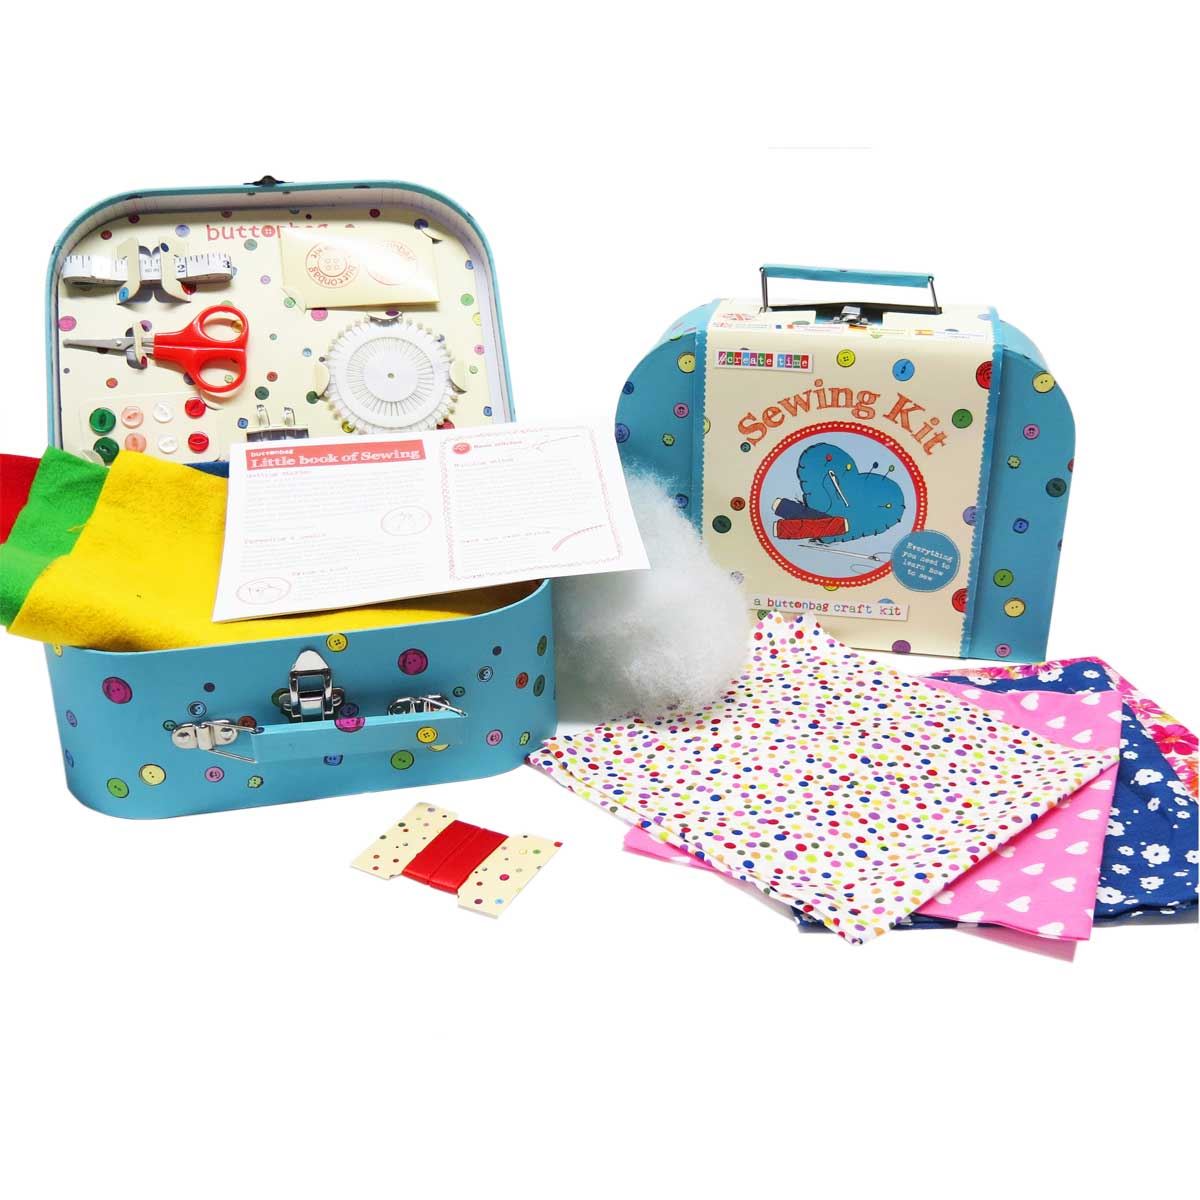 Sewing Kits For Kids - Mulberry Bush